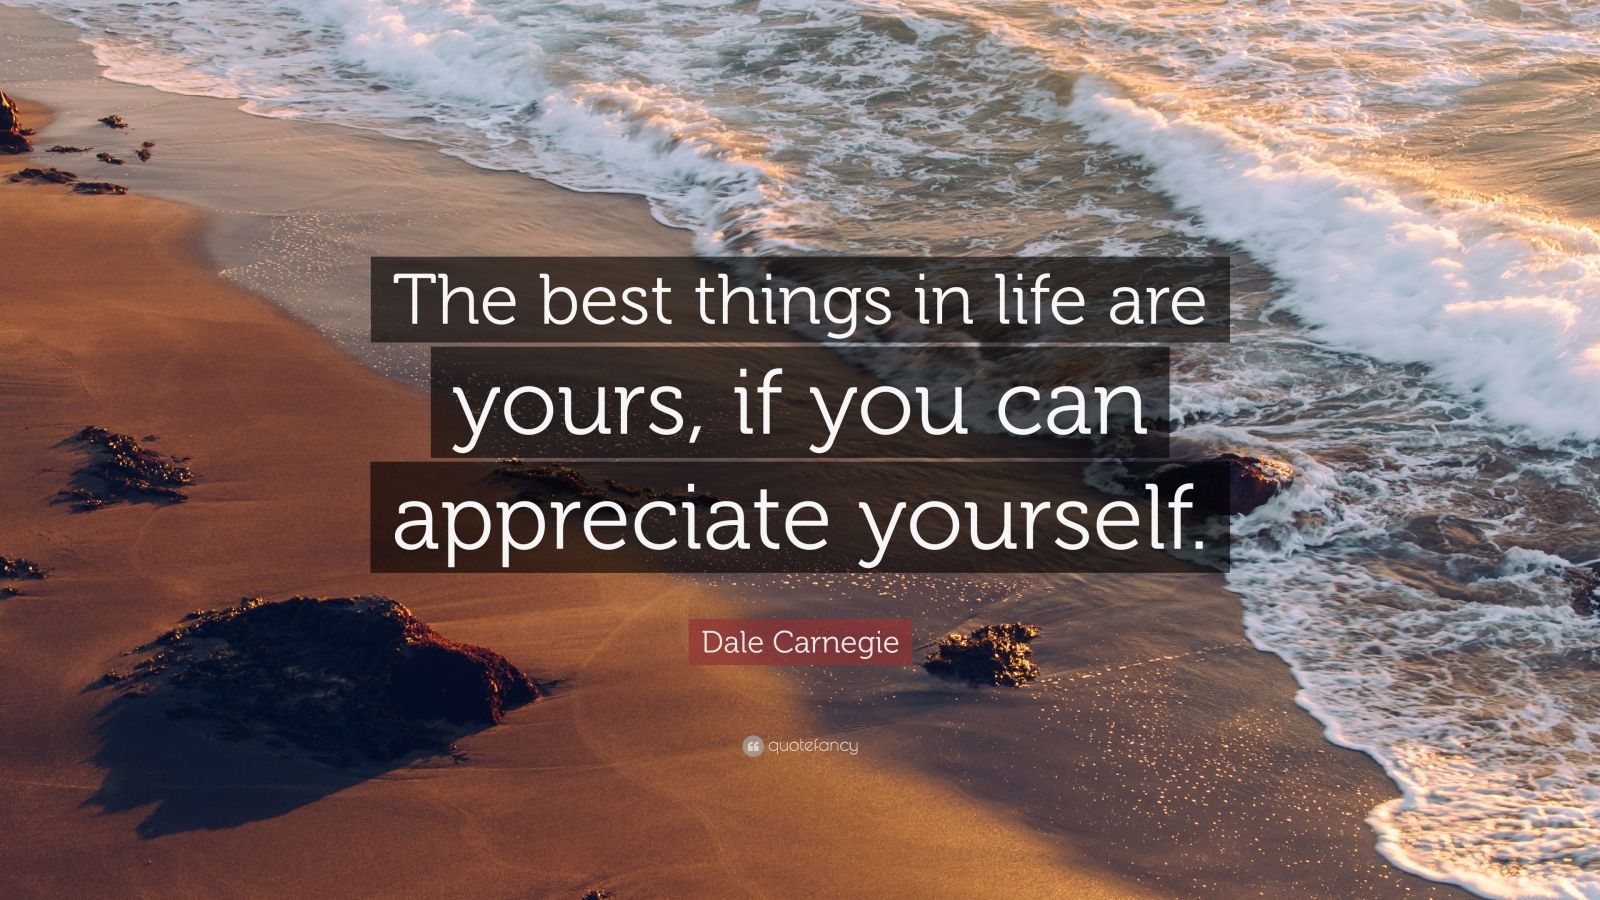 Dale Carnegie Quote: “The best things in life are yours, if you can